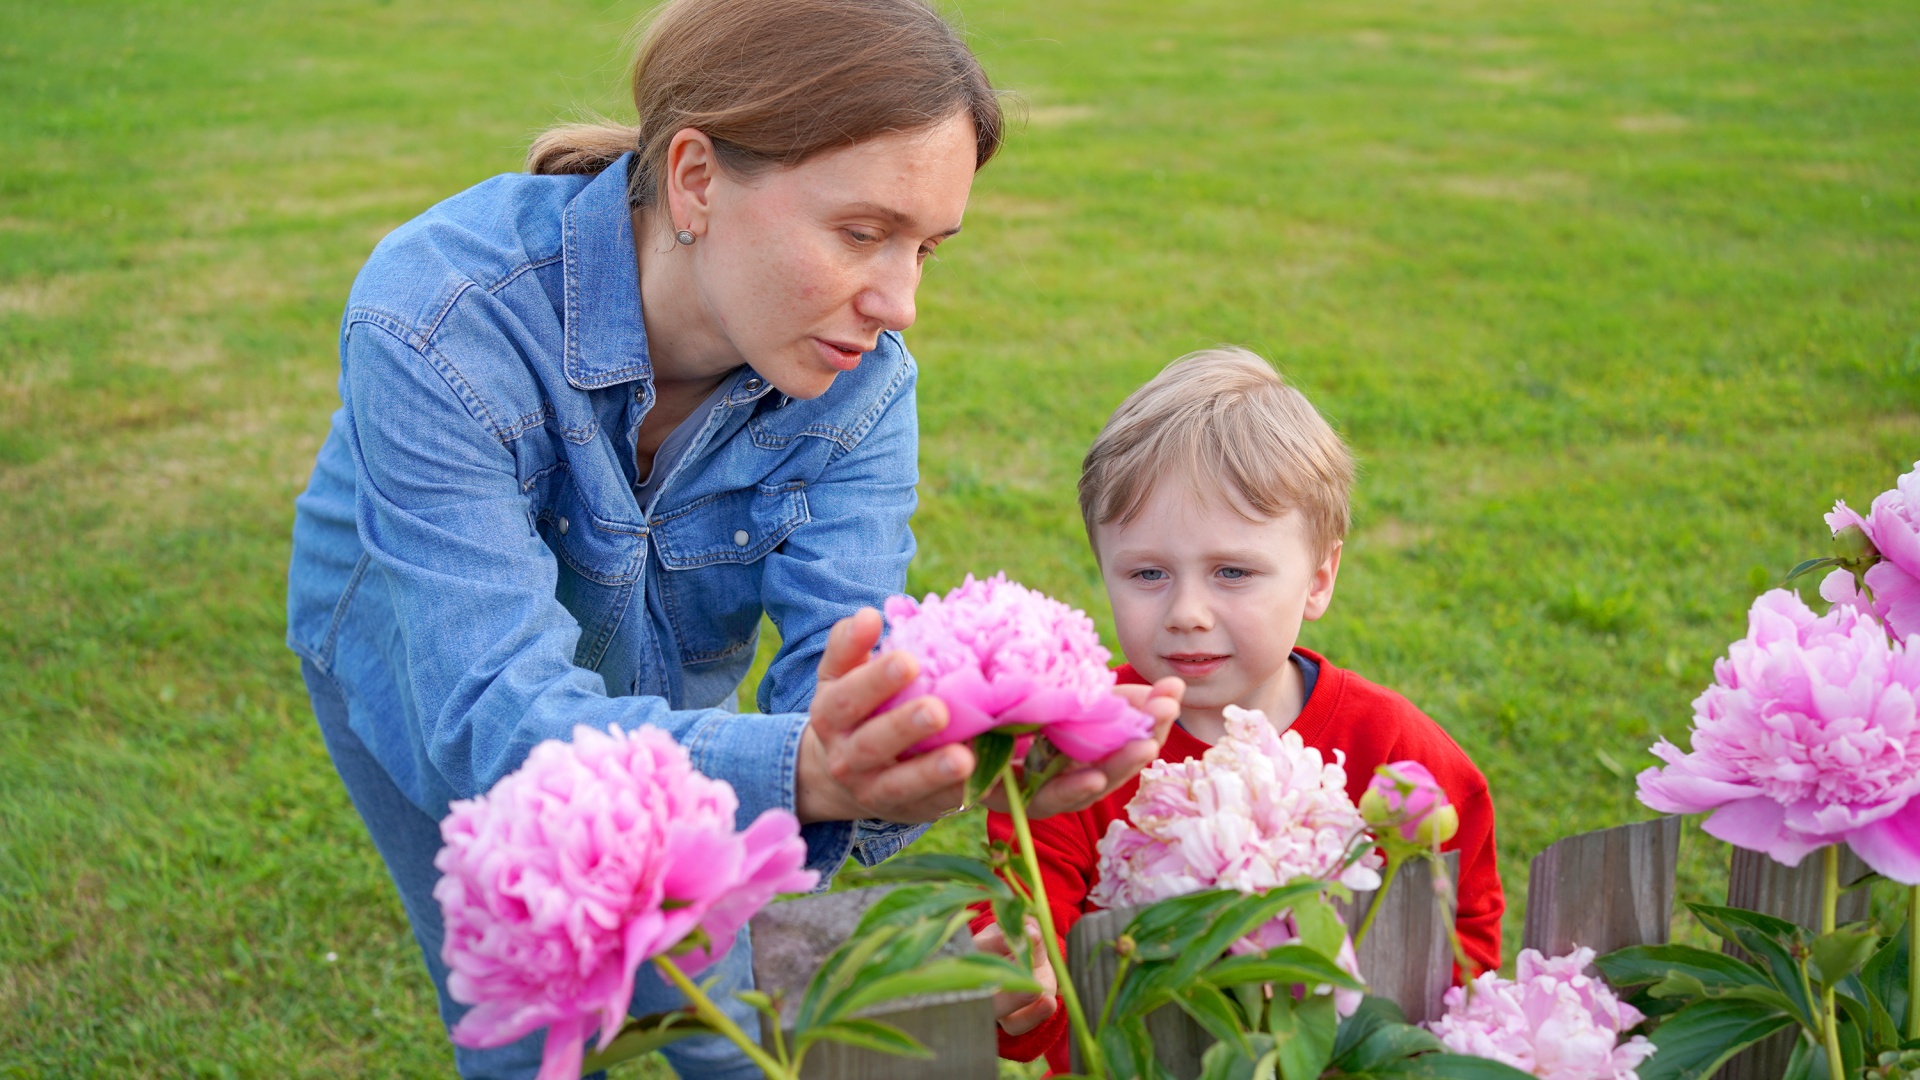 A Ukrainian mother shows her little boy the blossoming peonies in the garden of Hofgut Eck.